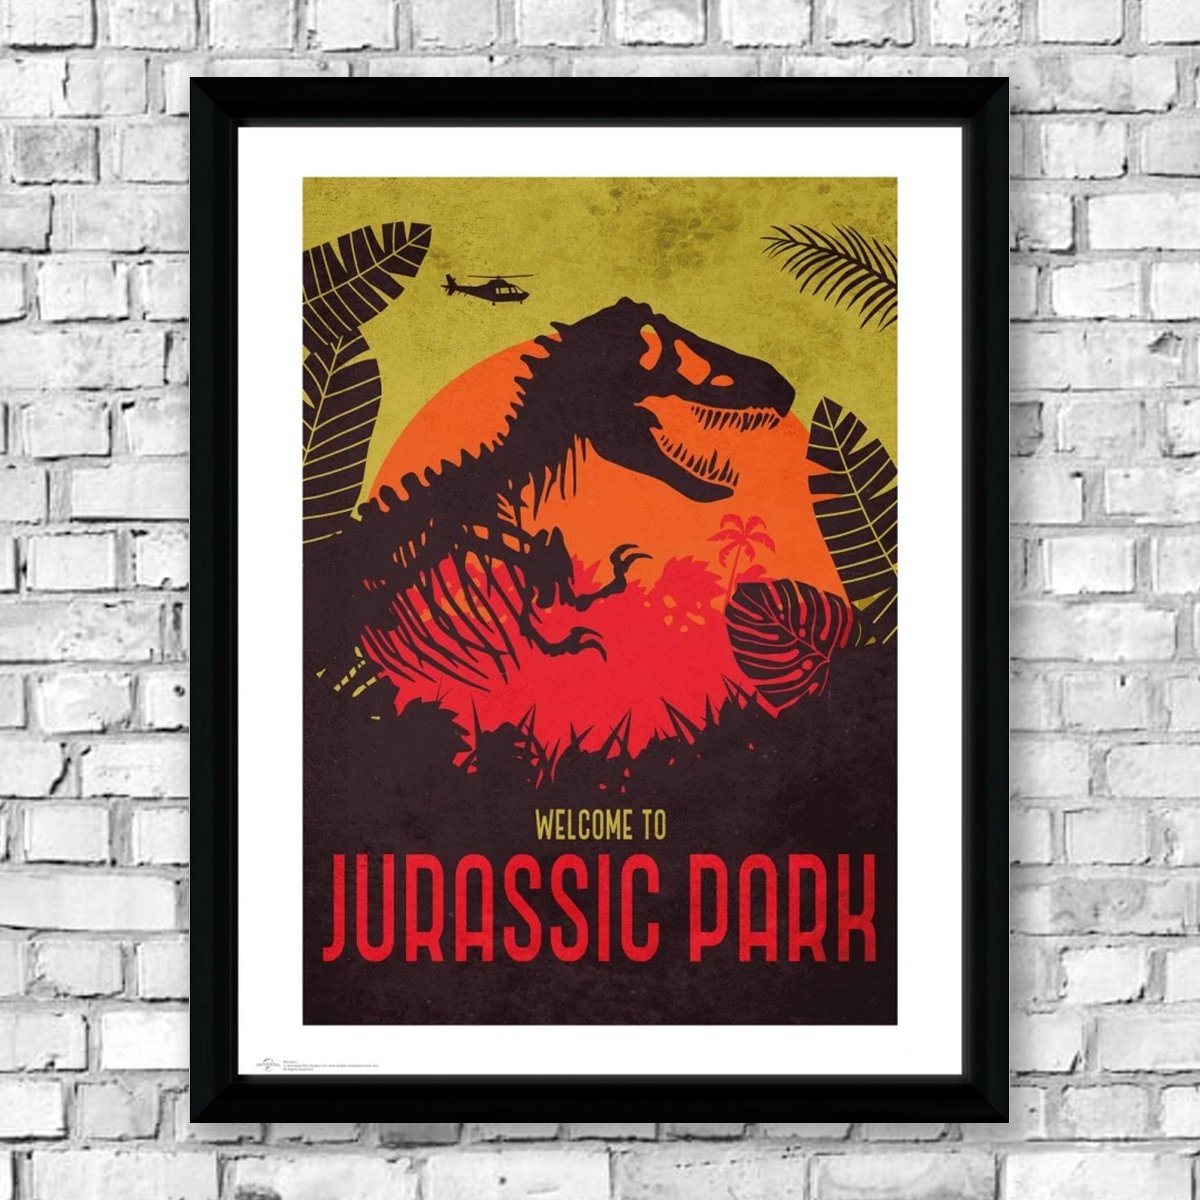 Jurassic Park Framed Silhouette Collectors Print - Indoor Outdoors